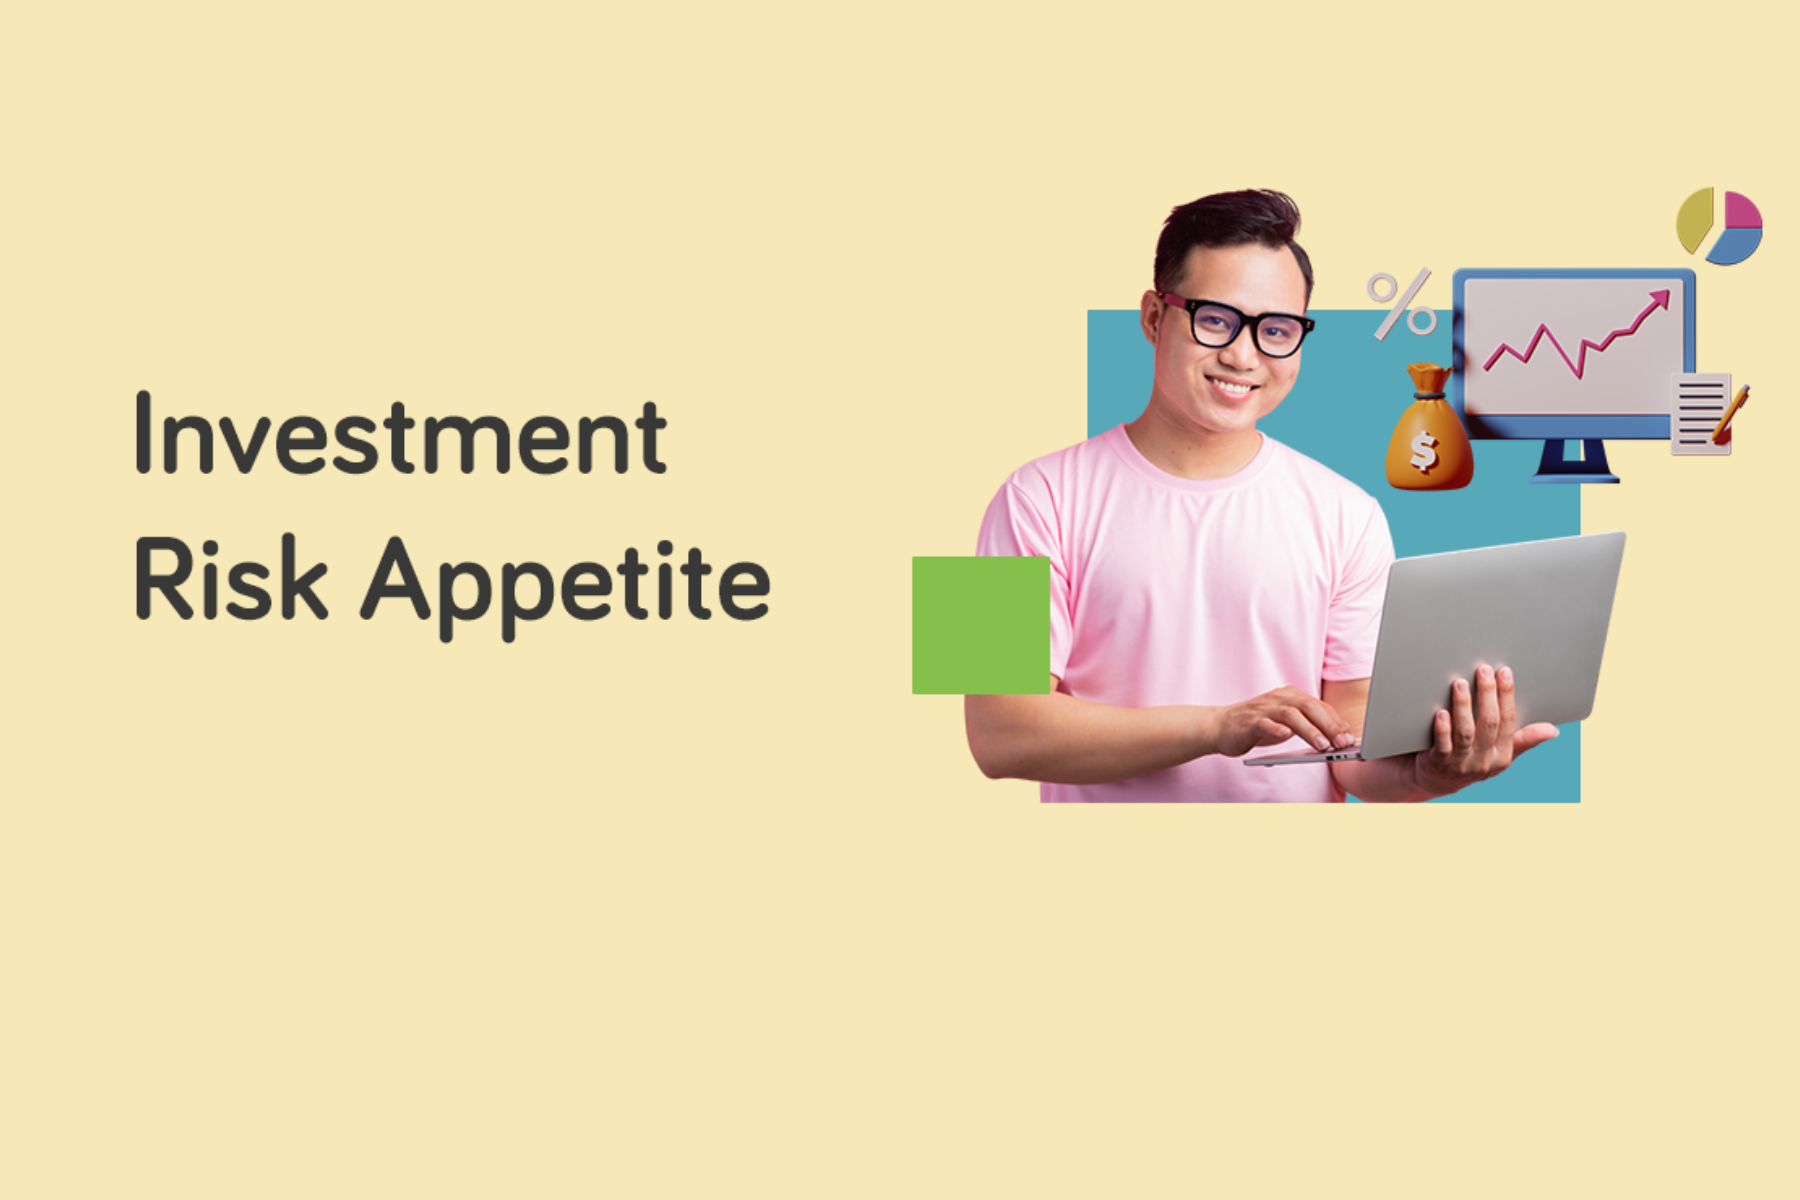 A smiling man is pictured using a laptop next to the words "Investment Risk Appetite"